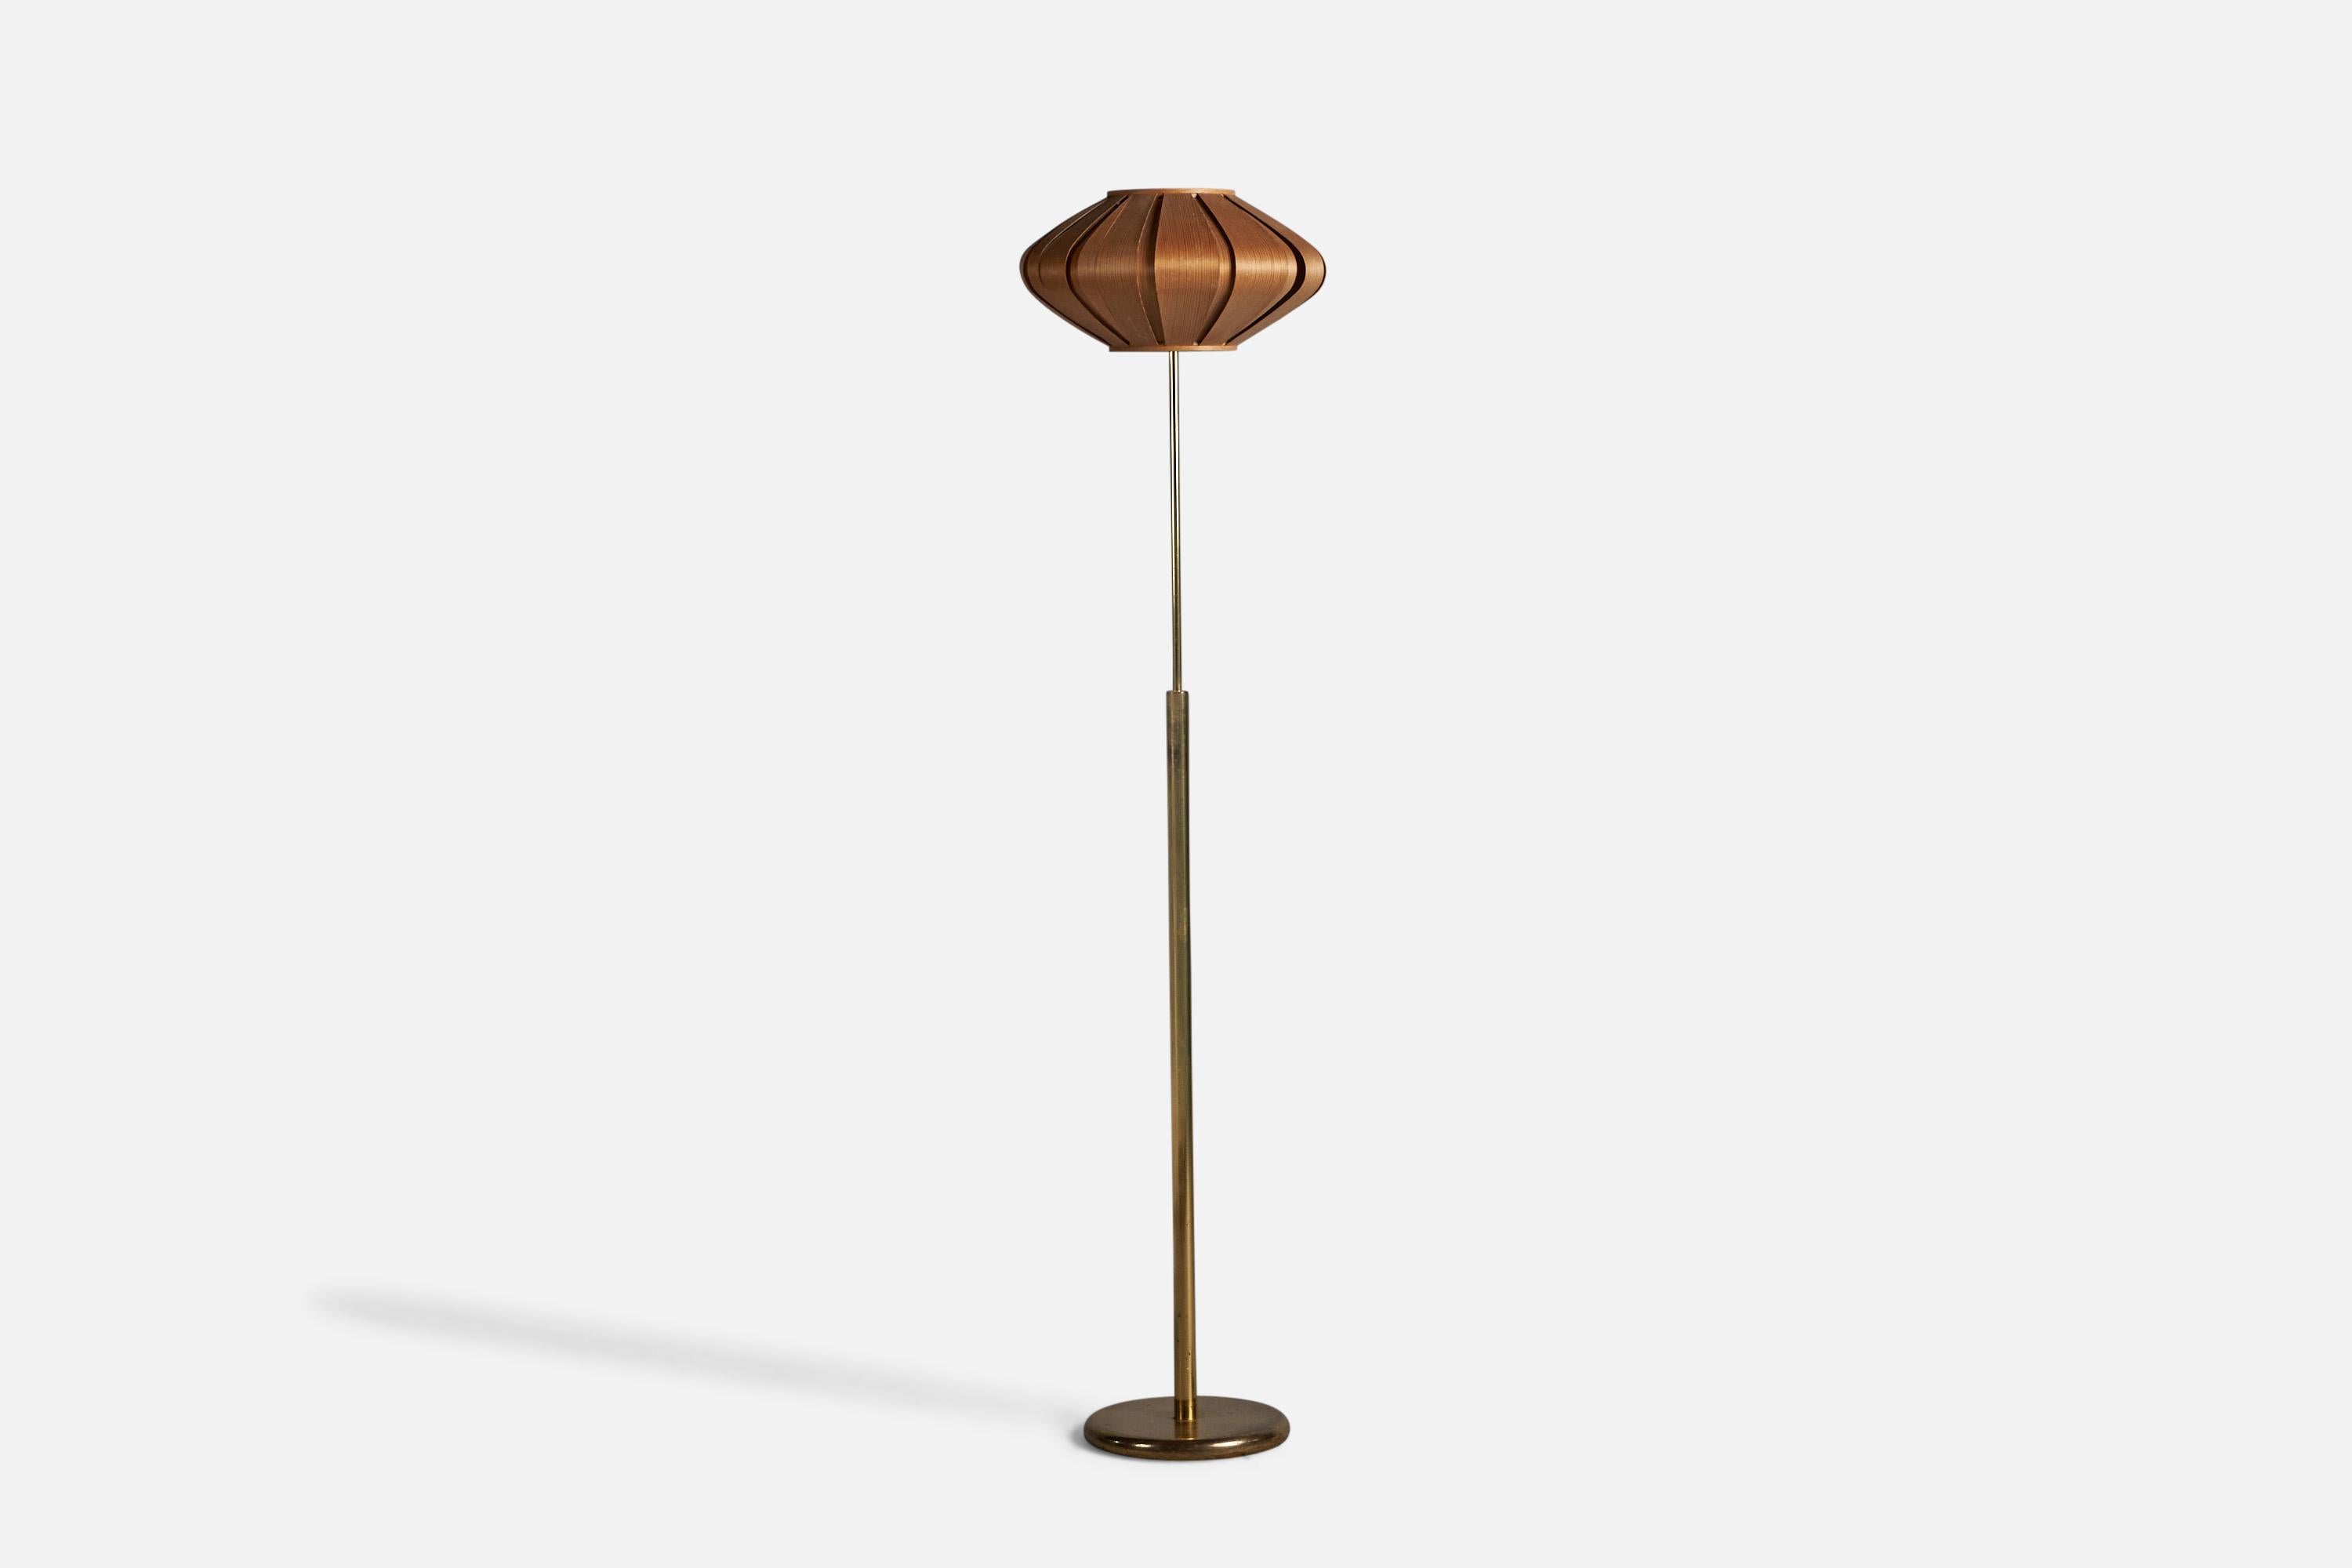 A brass, pine and moulded pine veneer floor lamp, designed and produced in Sweden, c. 1970s.

Overall Dimensions (inches): 63.5